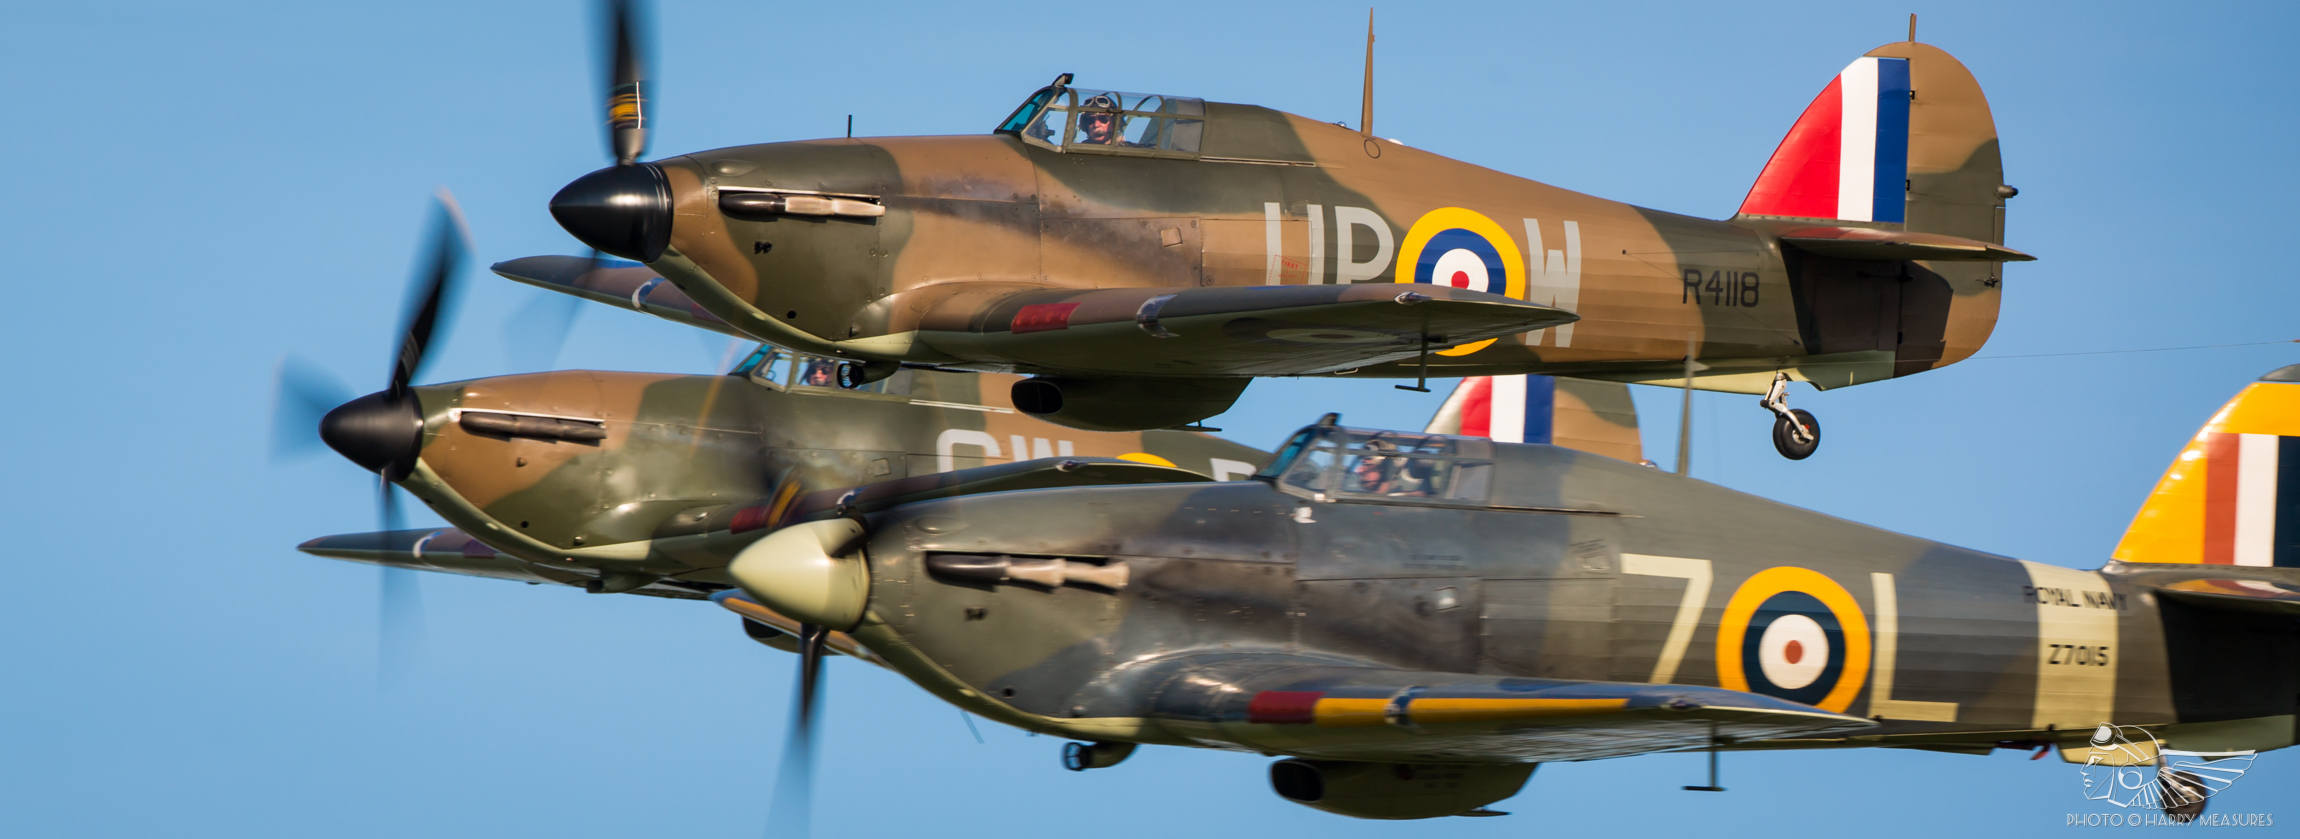 Shuttleworth’s June Evening Airshow hailed as a classic